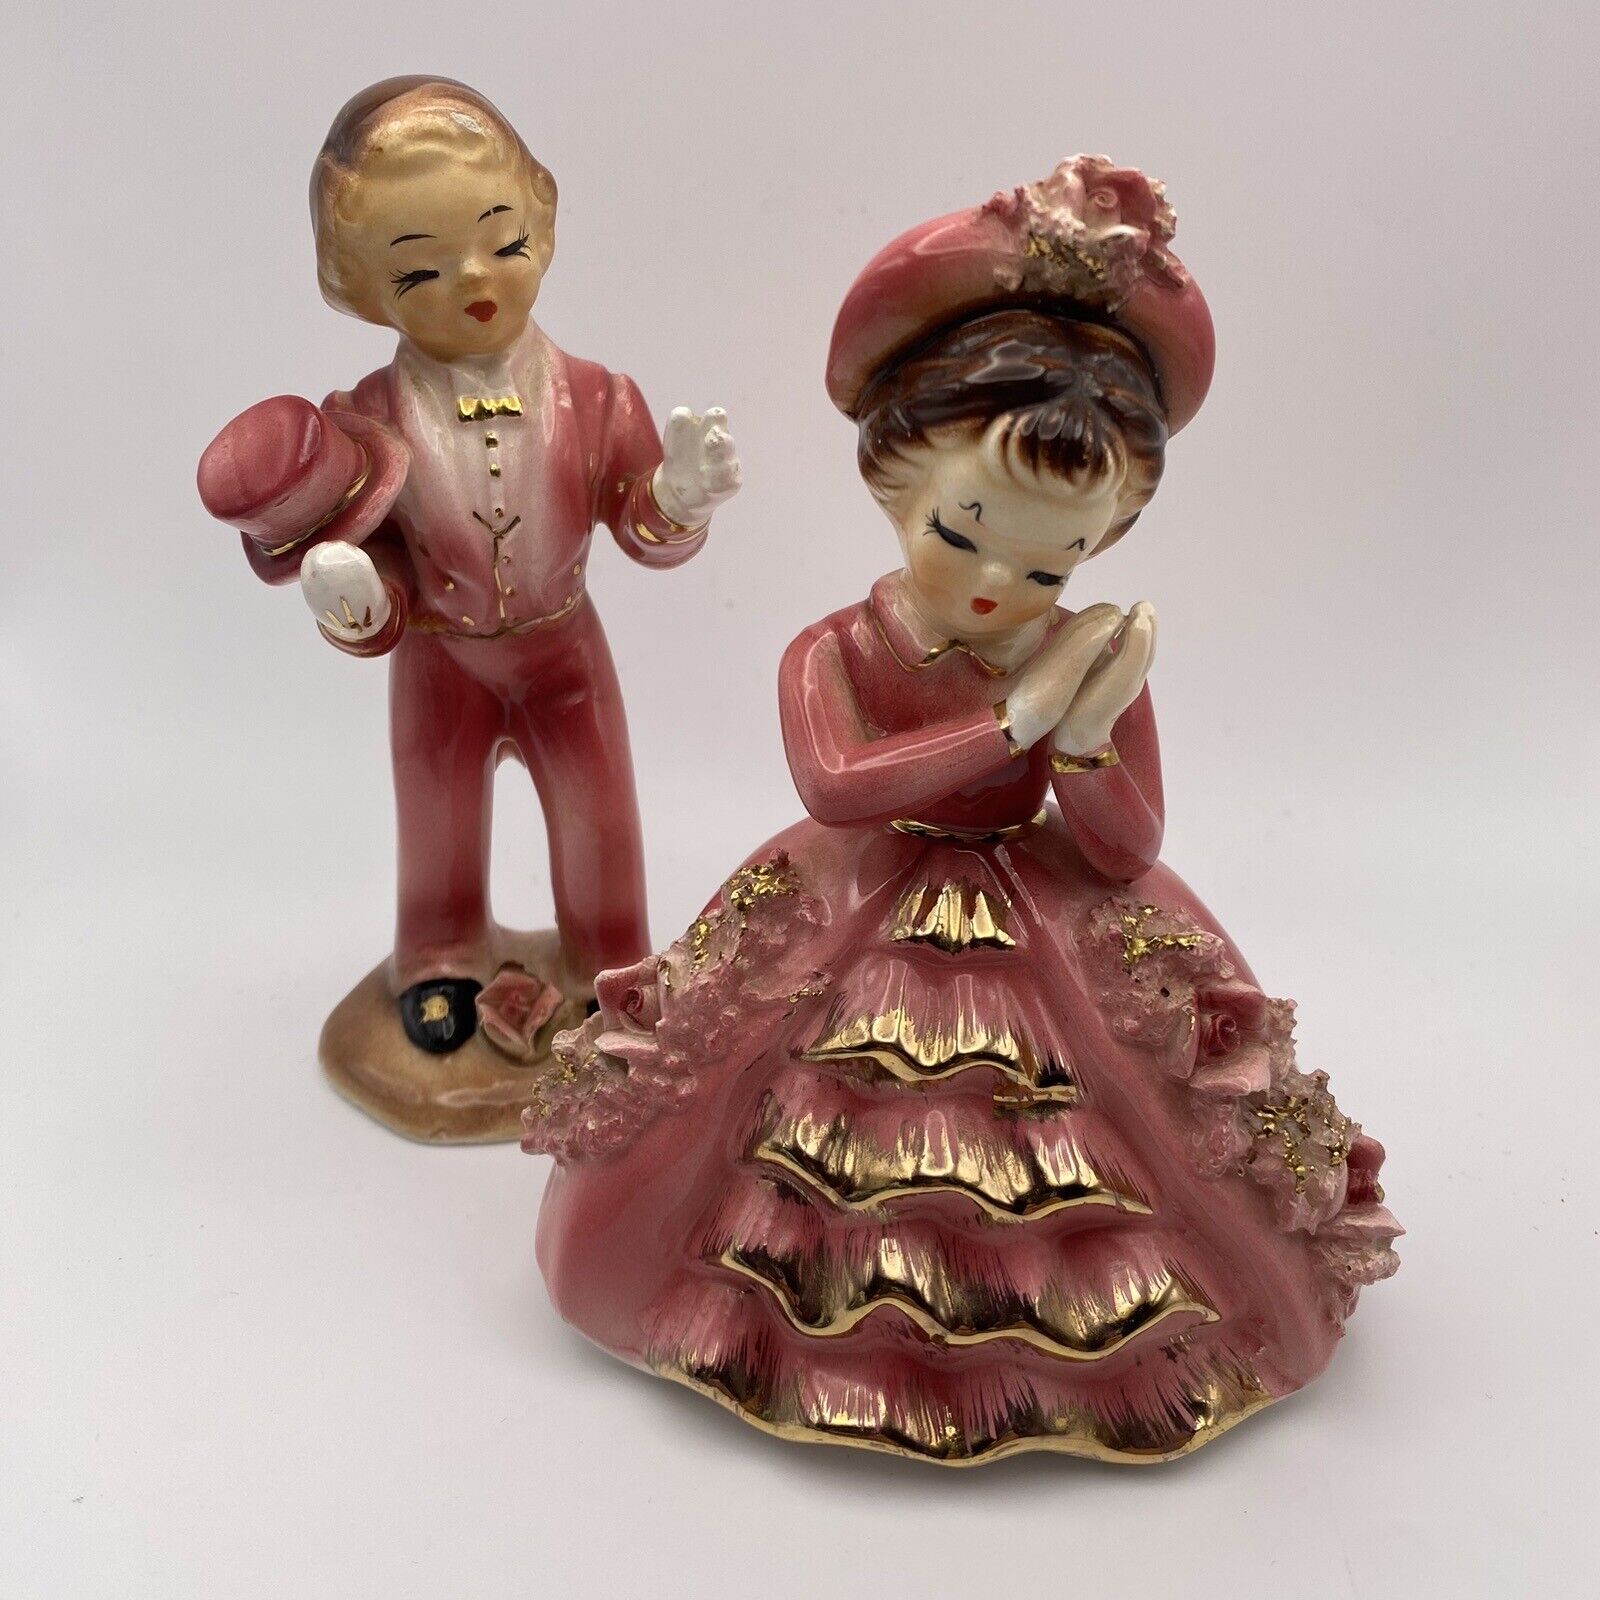 Antique Josef Boy and Girl Figurines - Made in Japan